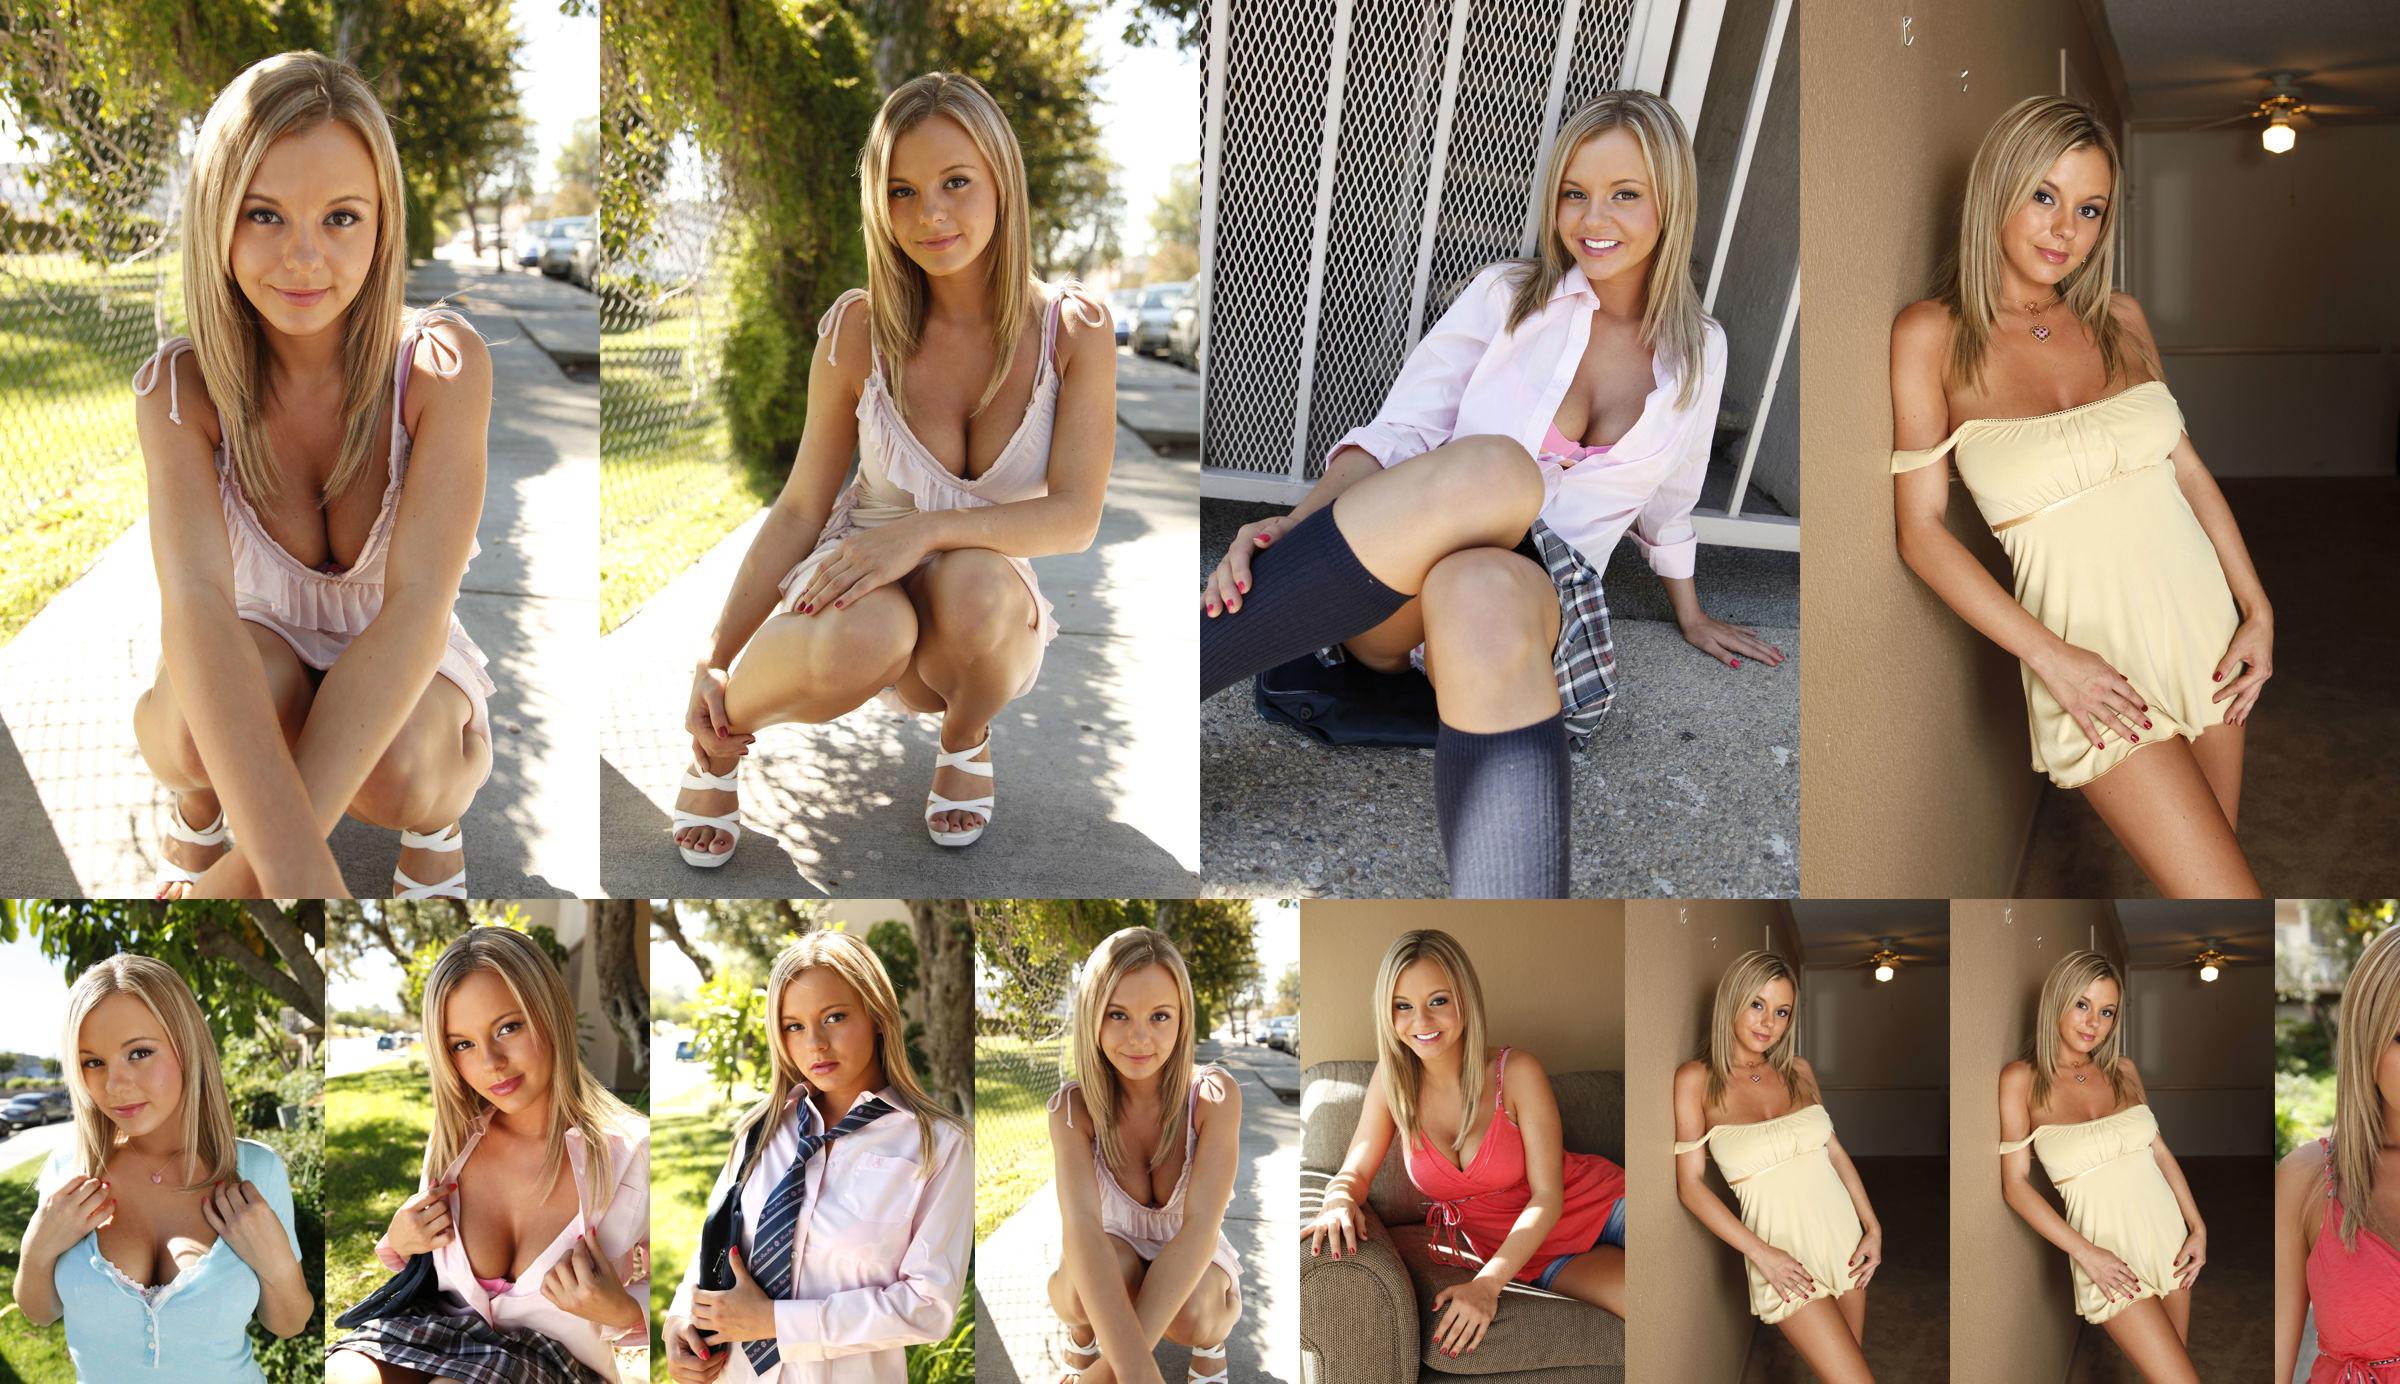 [LOVEPOP] Belle FILLE d'outre-mer - Bree Olson - PPV No.2c6076 Page 3